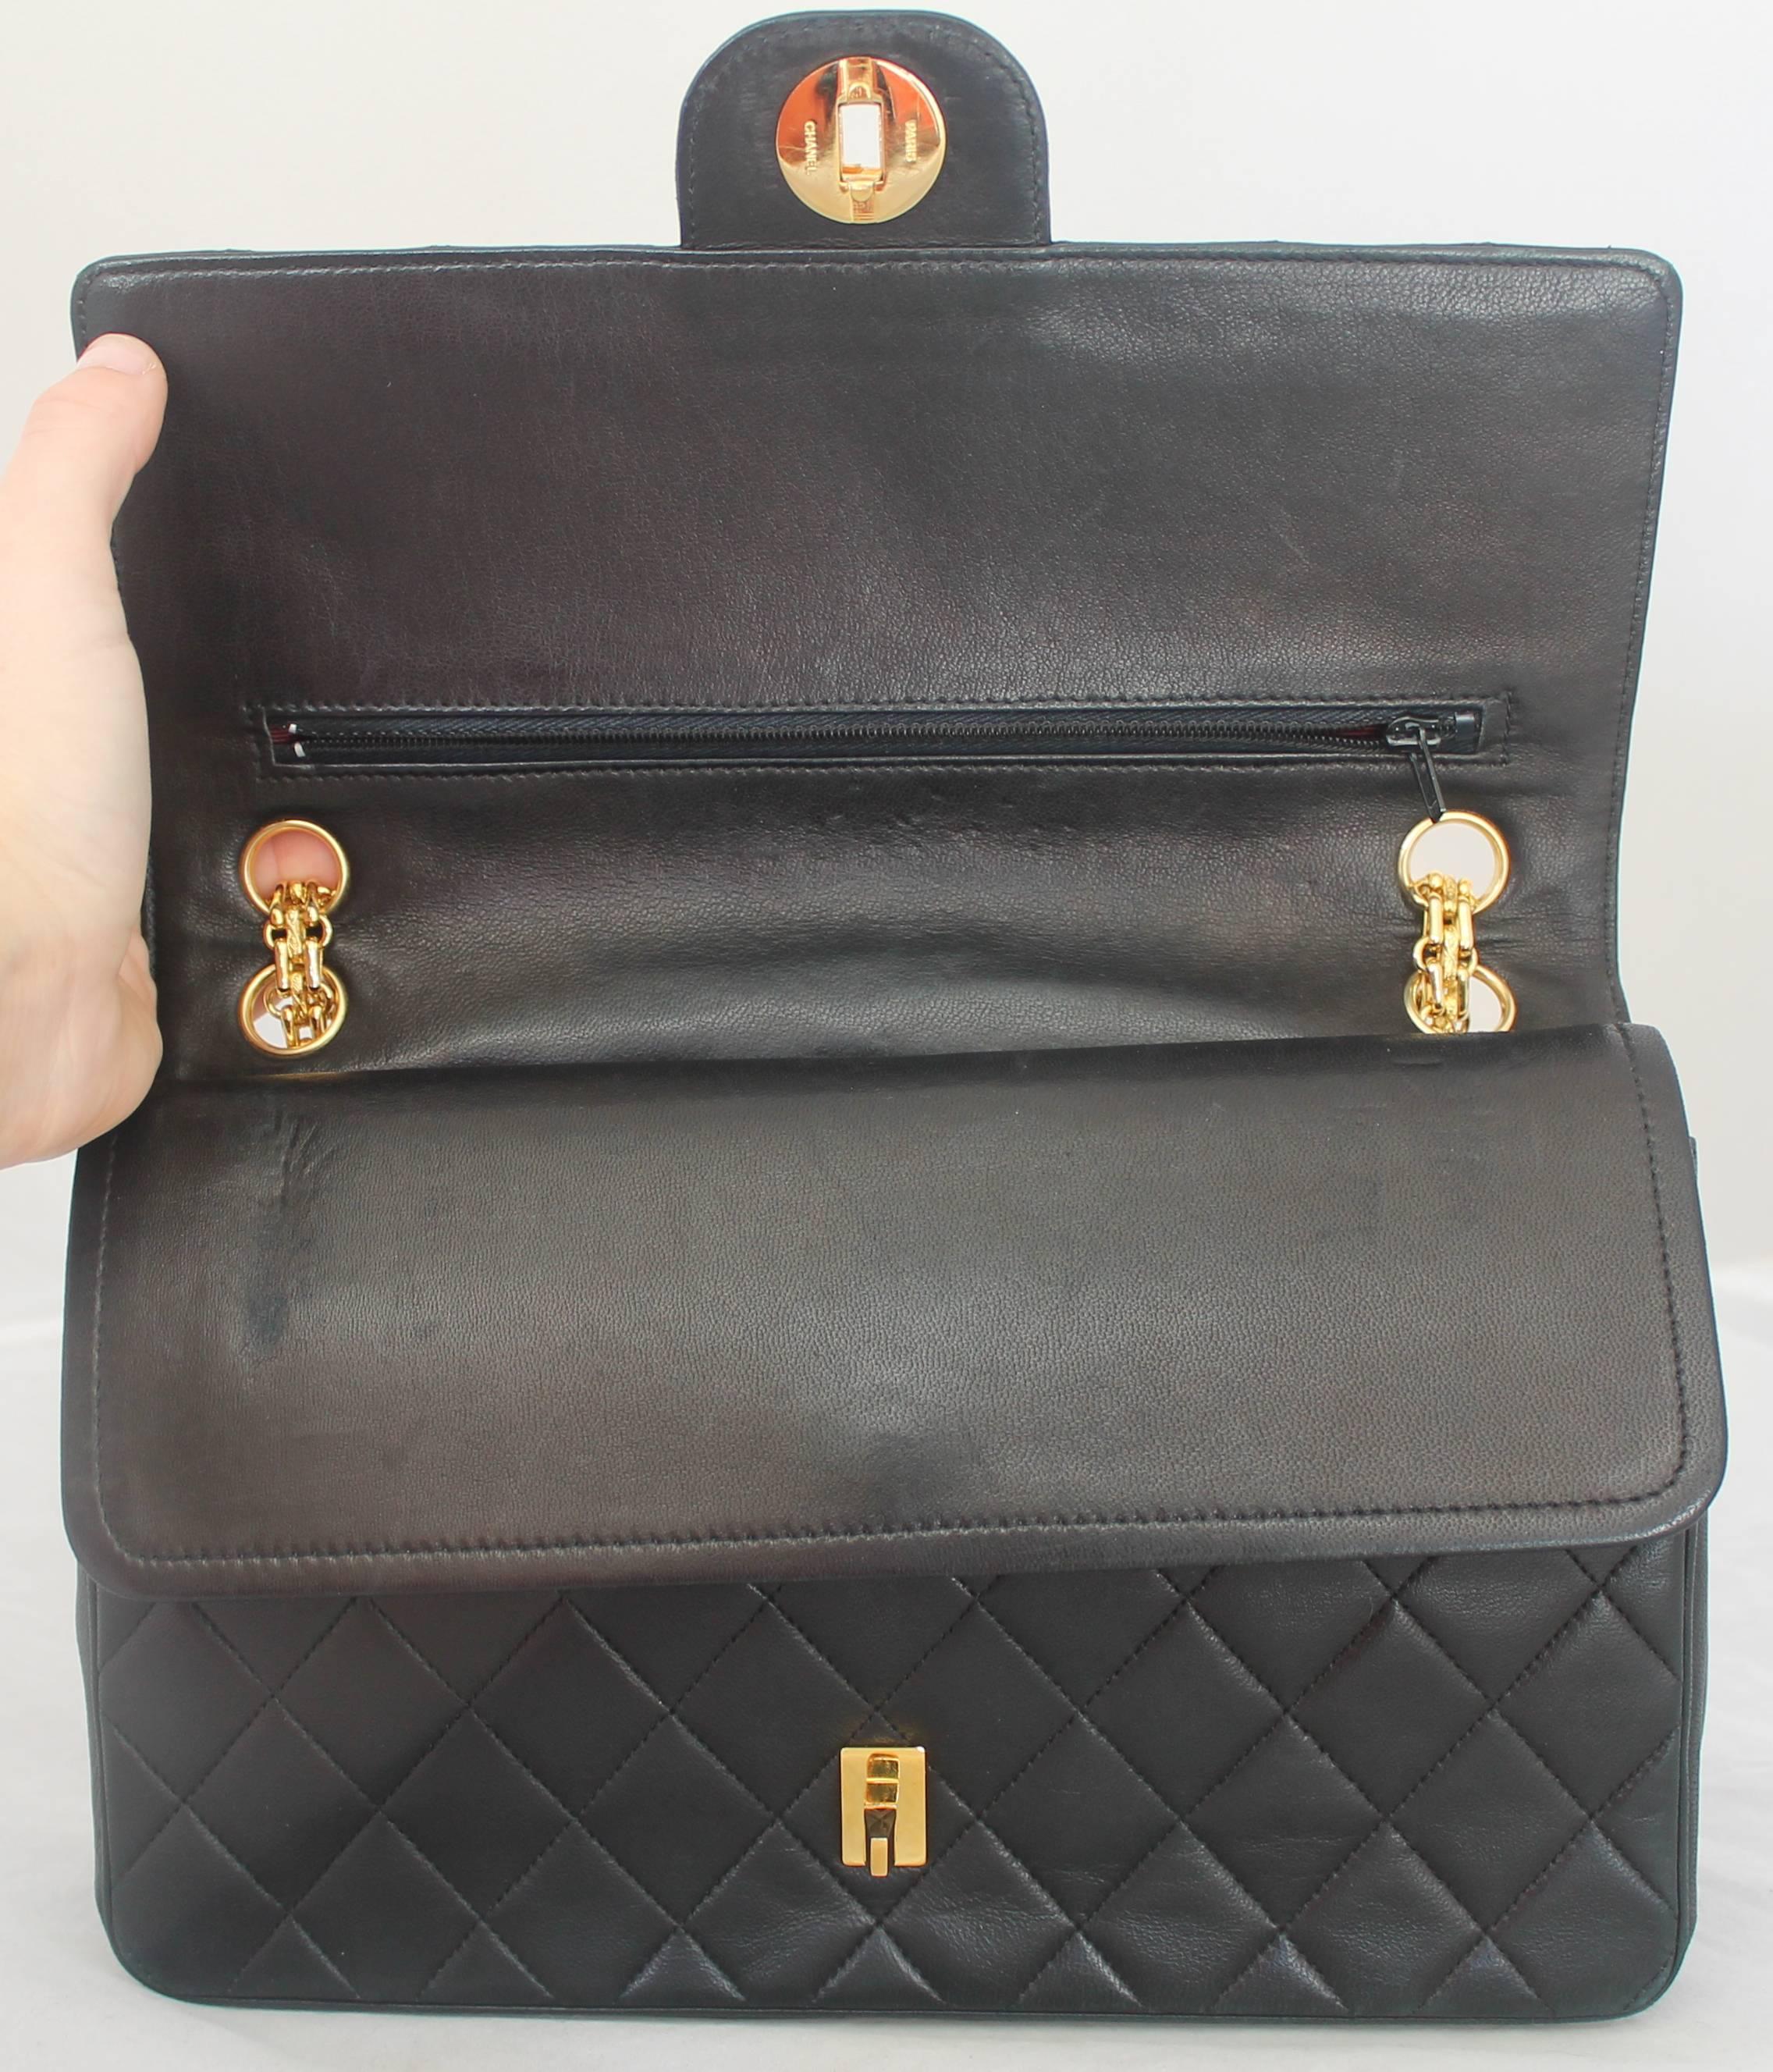 Gray Chanel Black Quilted Lambskin Classic Double Flap Handbag - GHW - Circa 1980's